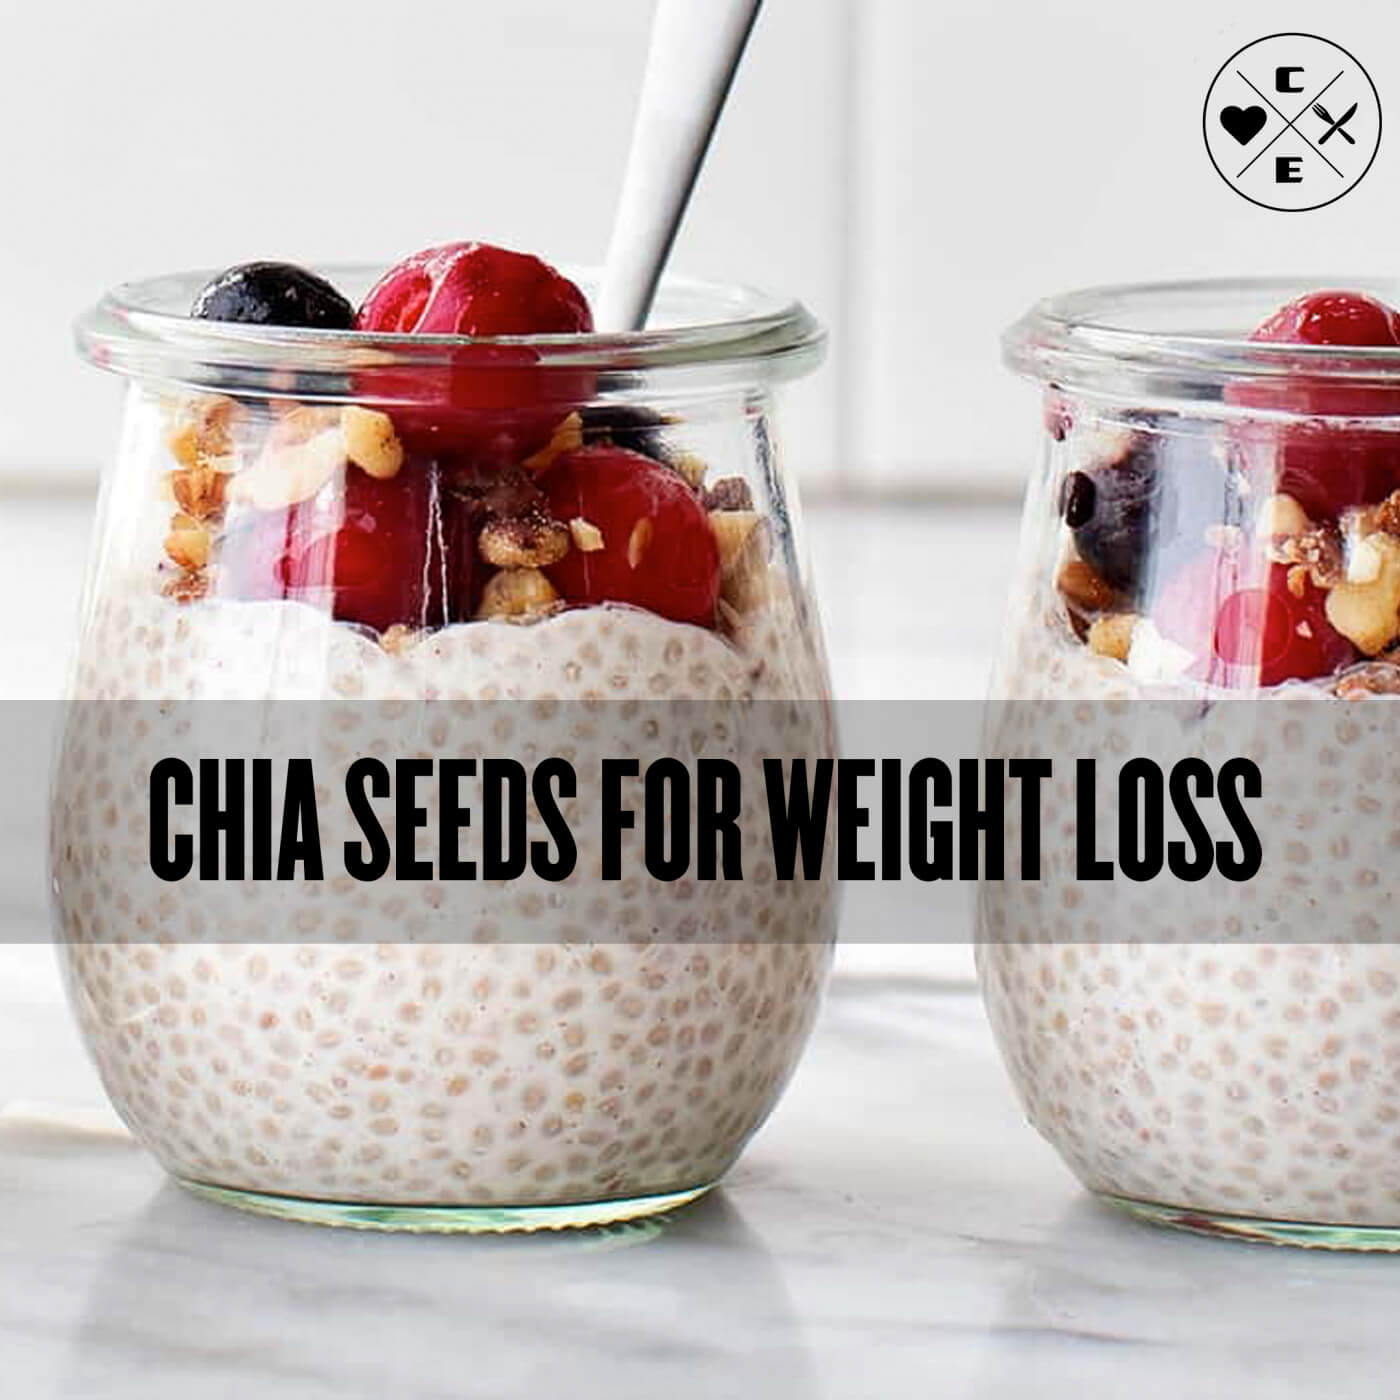 Using Chia Seeds to Help with Weight Loss